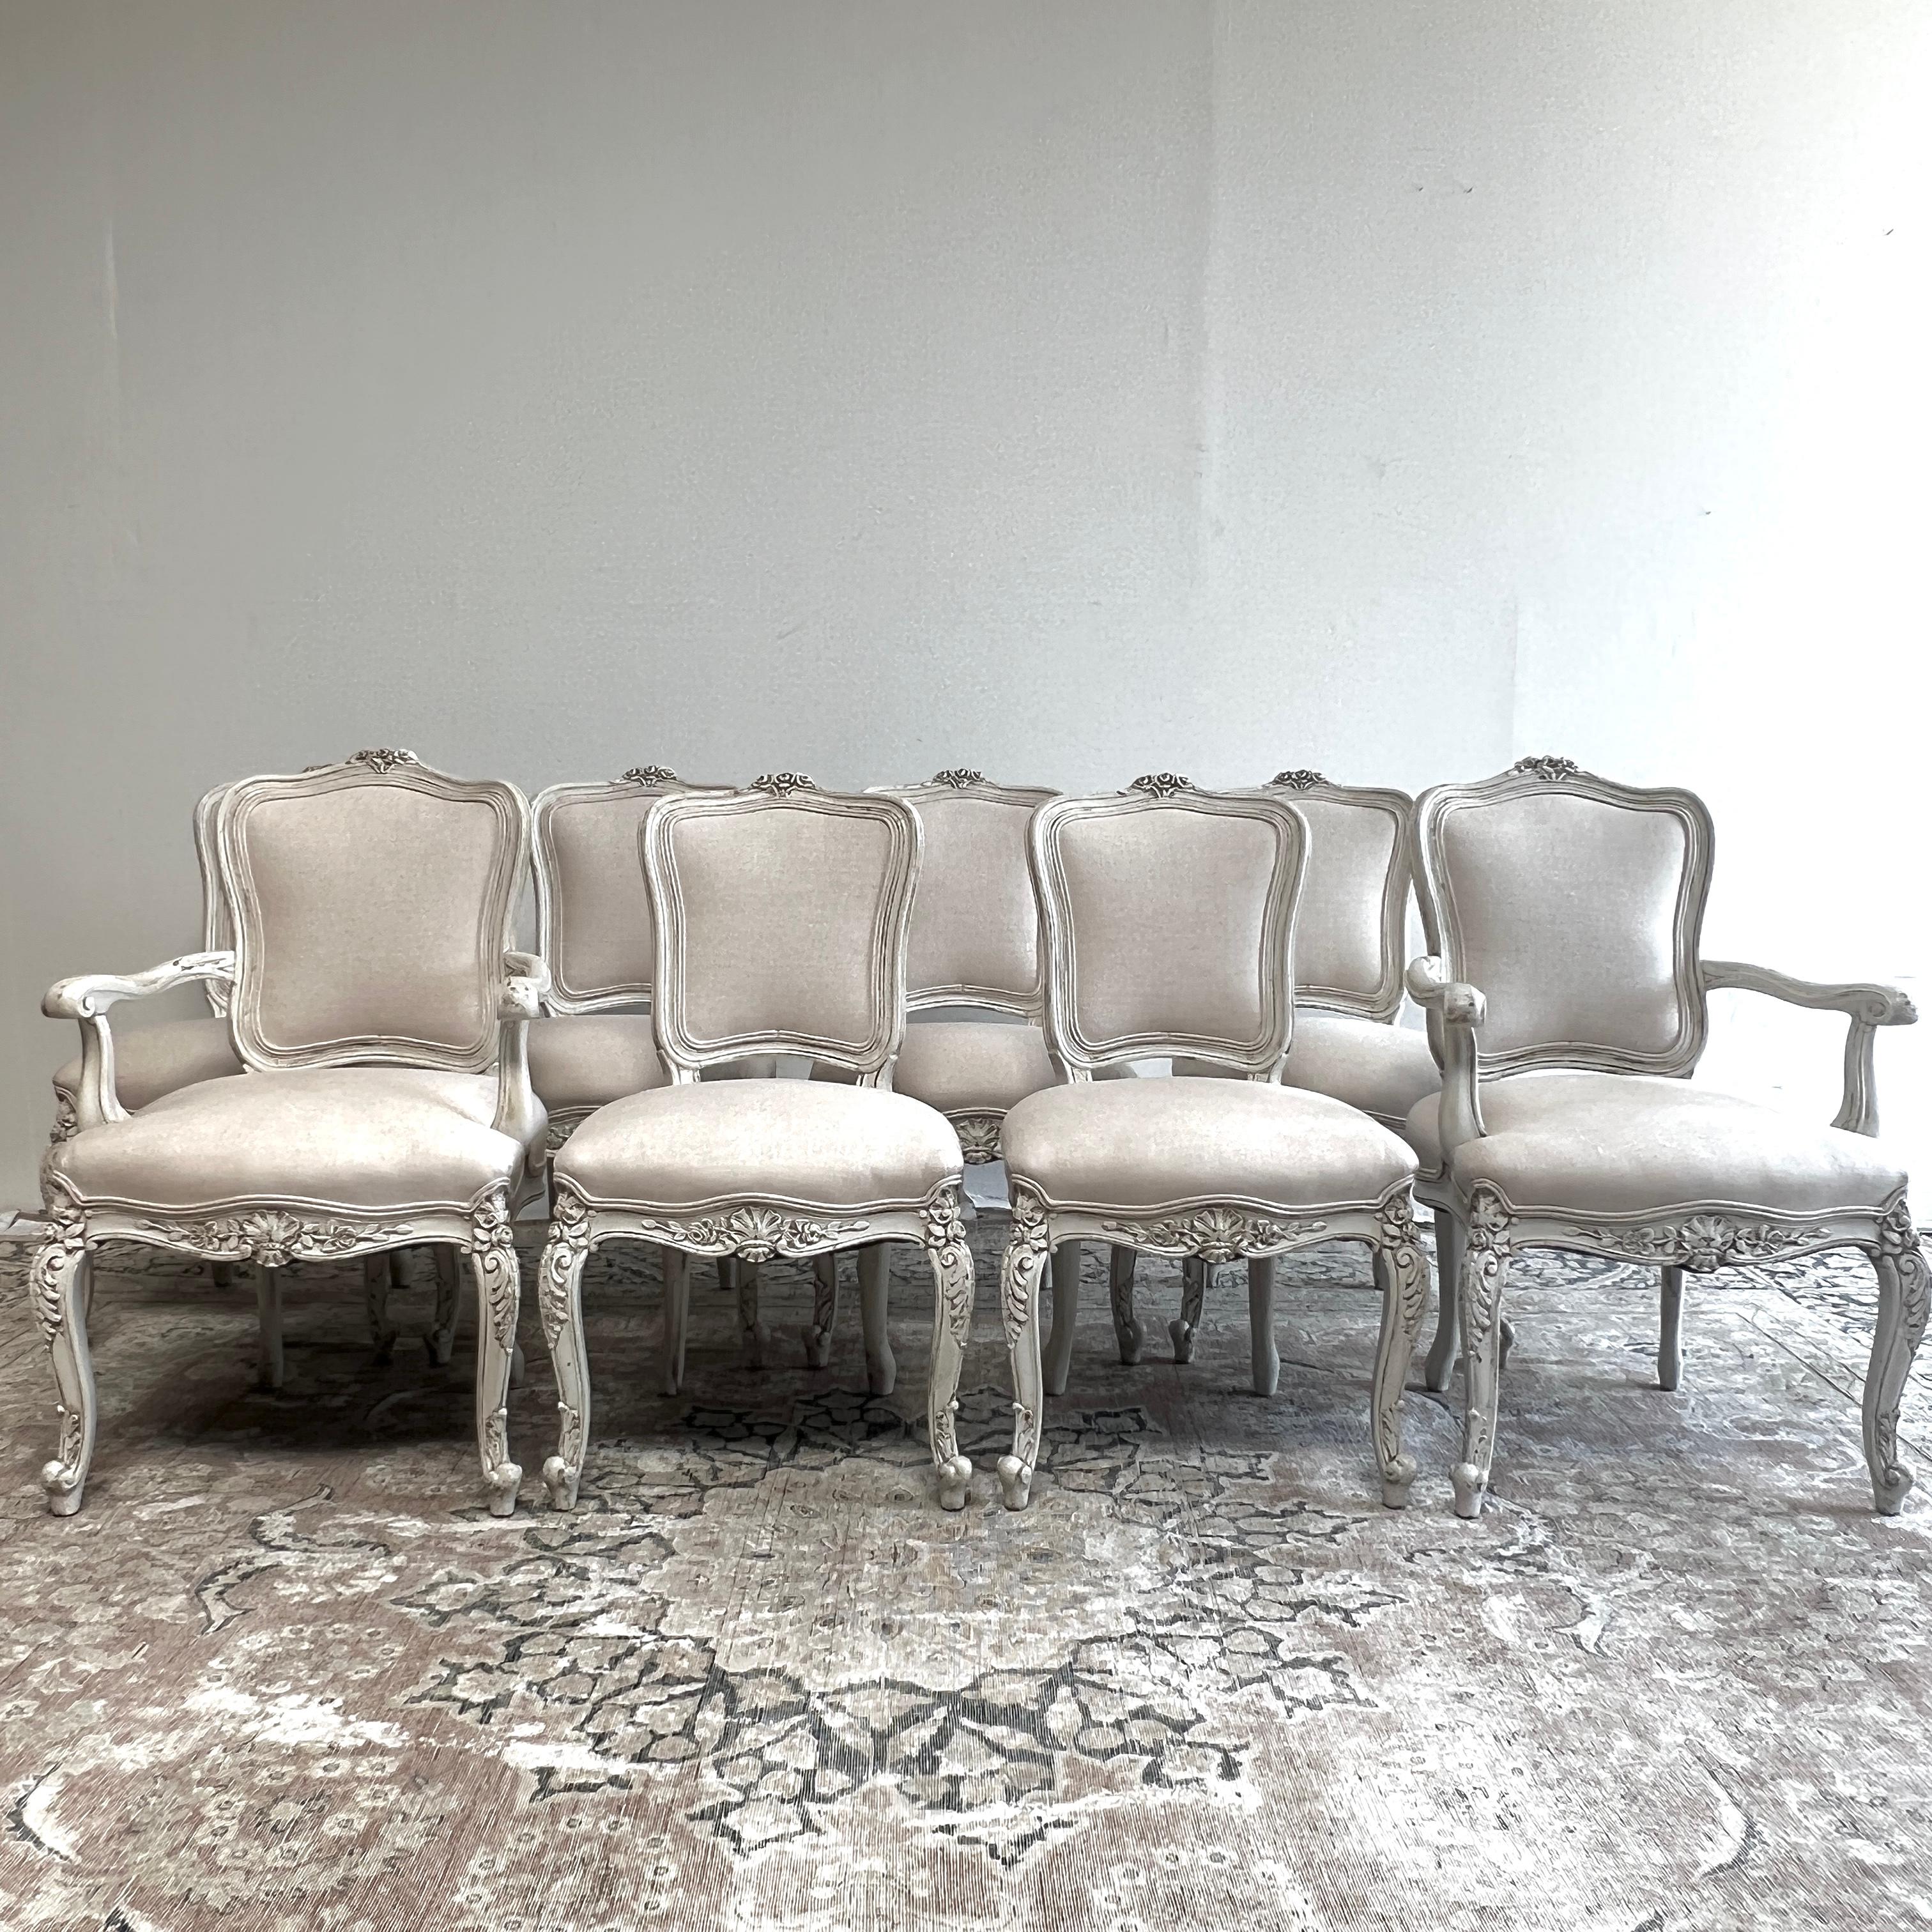 Set of 8 dining chairs painted in a french antique white, upholstered in a heavy weight natural linen, finished with a double welt trim.
Solid and sturdy, ready for everyday use.

ARM CHAIR DIMENSIONS:
24